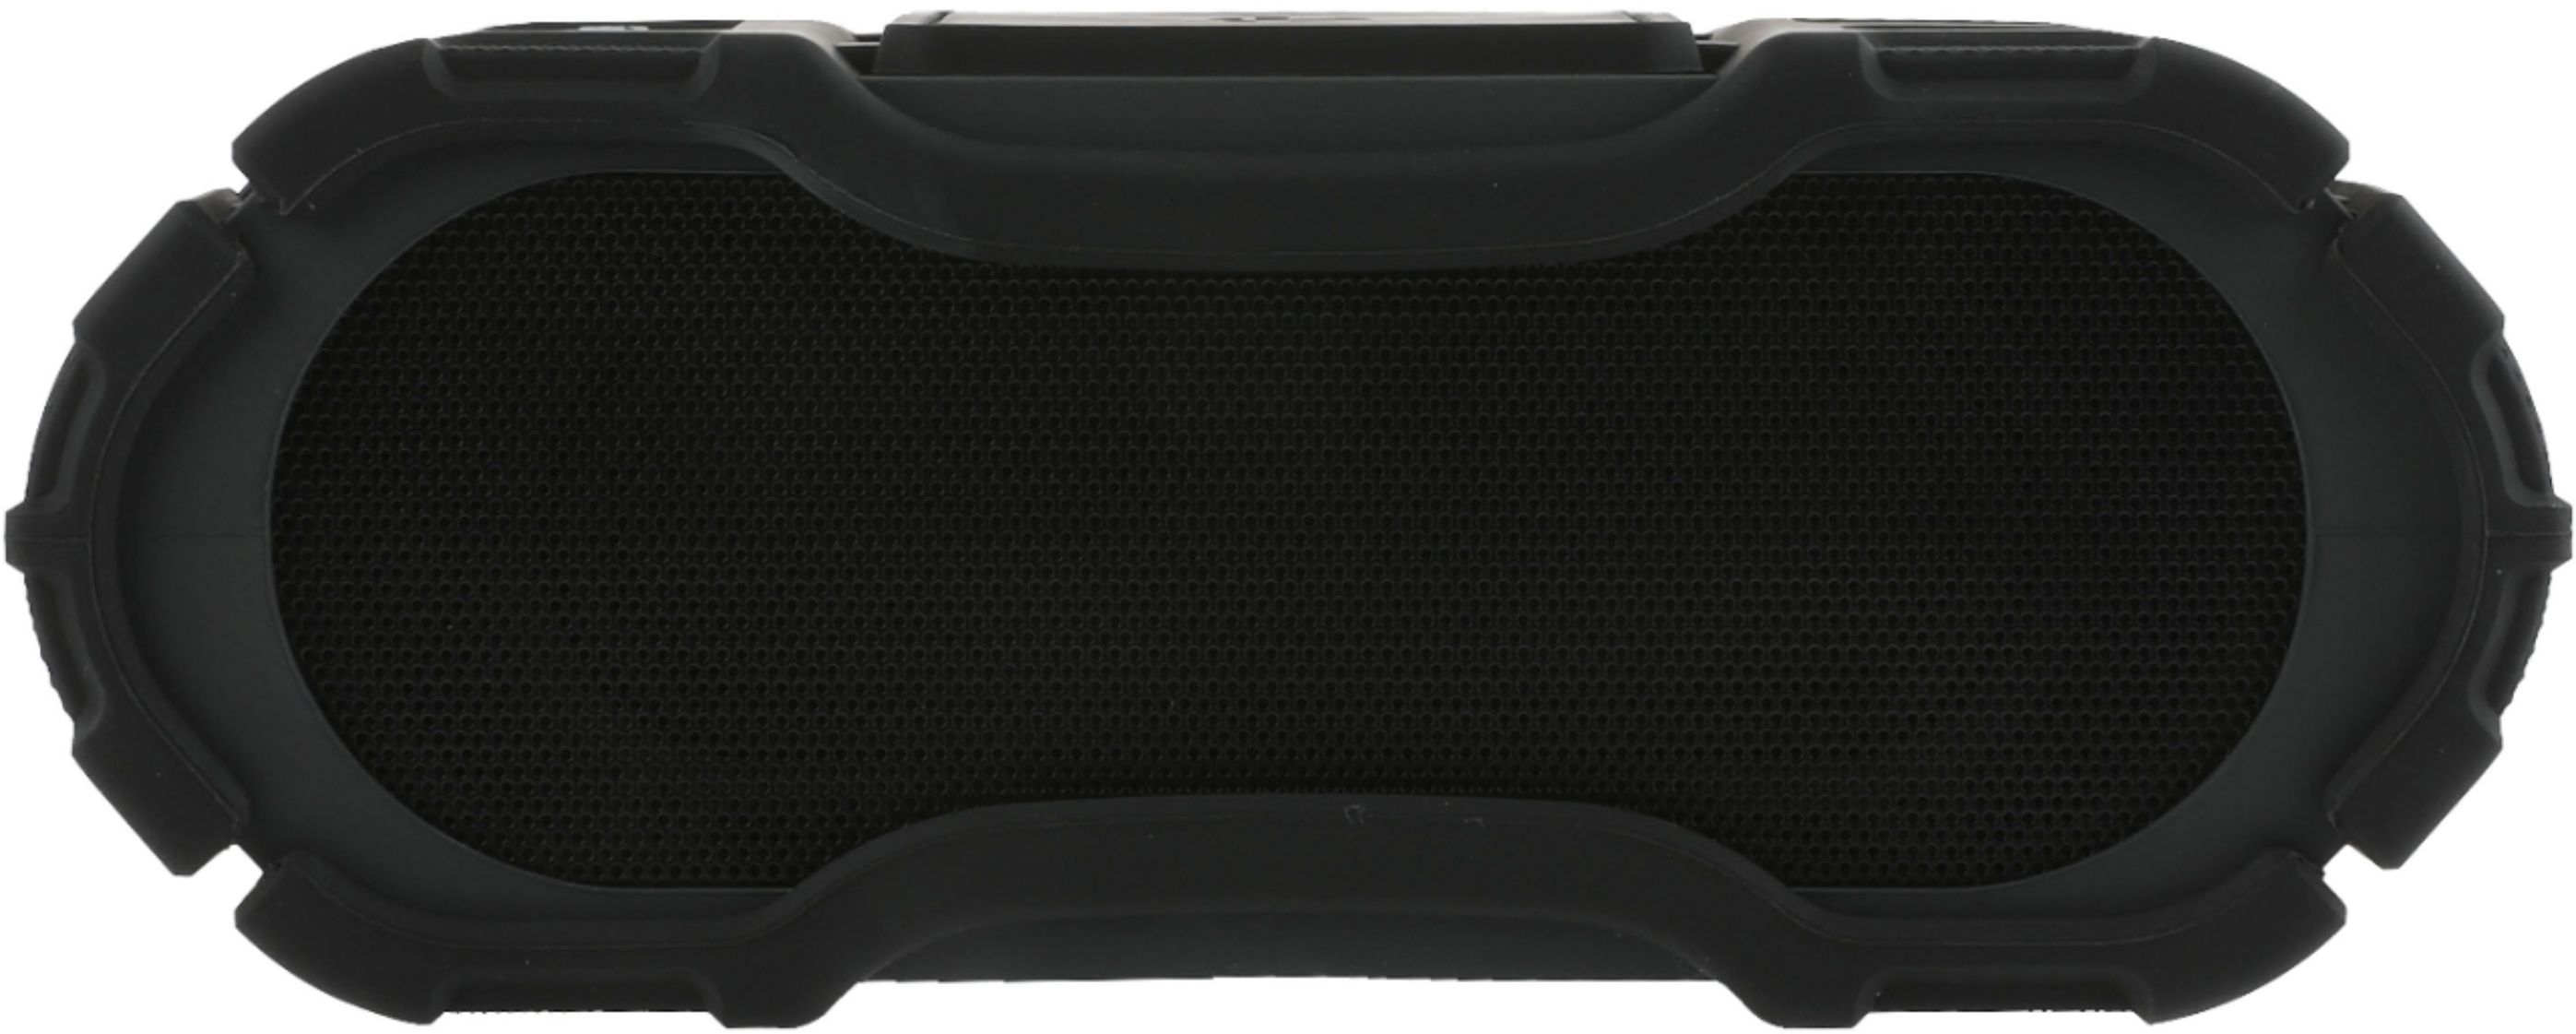 Braven Ready Solo Best Rugged Bluetooth Speaker & Giveaway